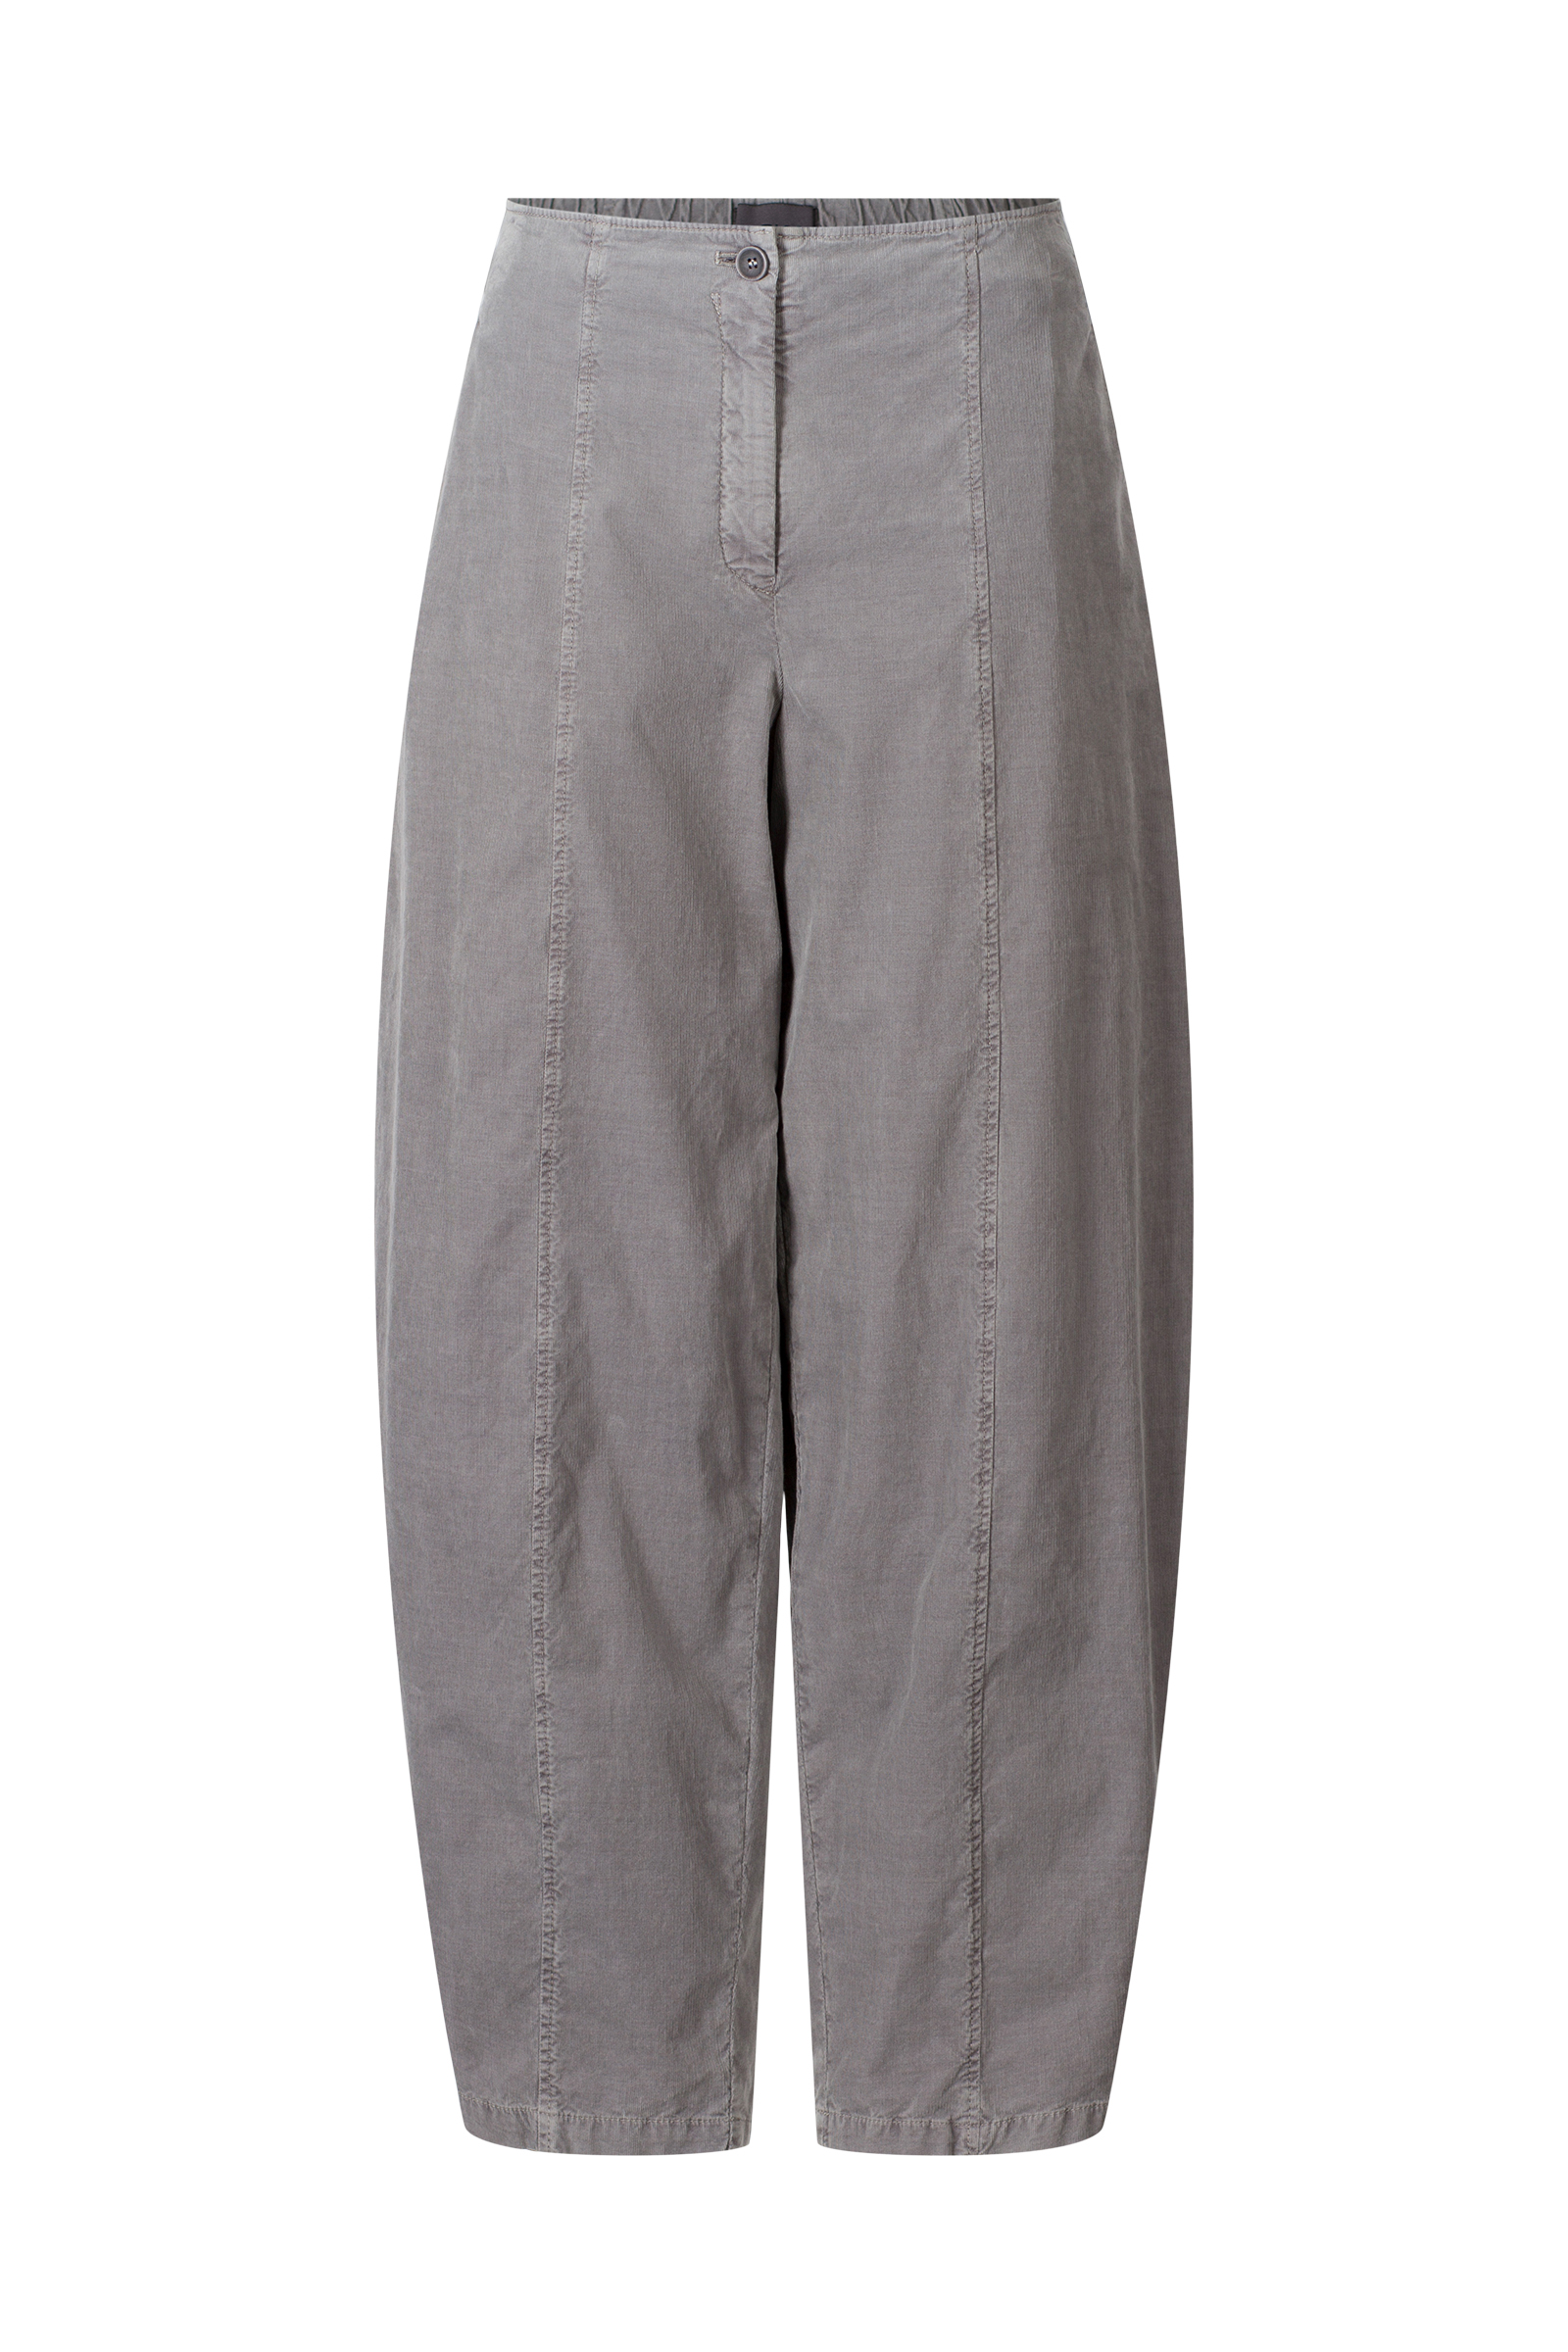 OSKA - Trousers Vassto 333 / Cotton cord with stretch content